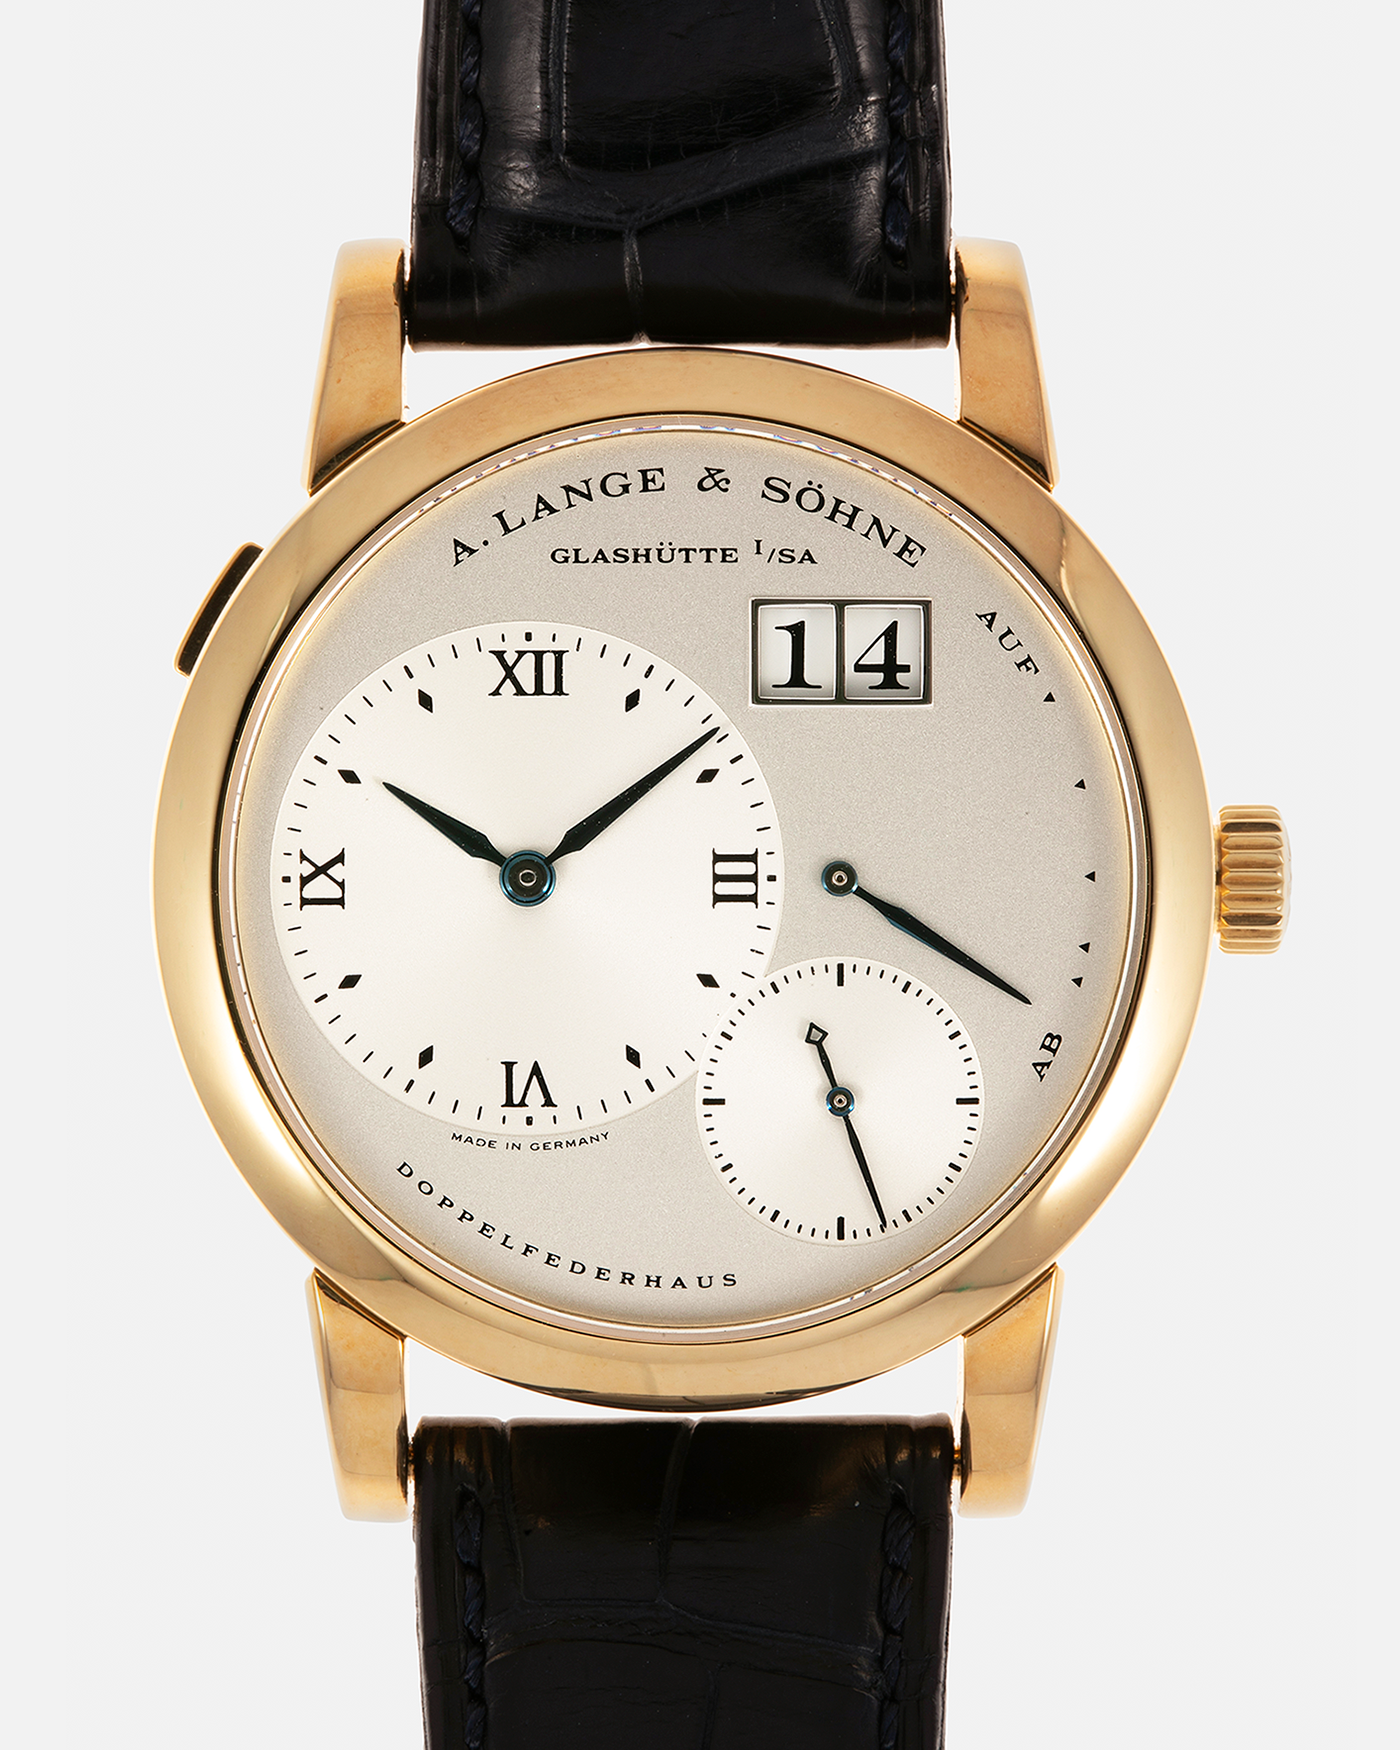 Brand: A. Lange & Söhne Year: 2000s Model: Lange 1 Reference: 101.022 Material: 18-carat Yellow Gold, German Silver Movement: A. Lange & Söhne Cal. L901.0, Manual-Winding Case Diameter: 38.5mm Lug Width: 20mm Strap: A. Lange & Söhne Black Alligator Leather Strap with Signed 18-carat Yellow Gold Tang Buckle